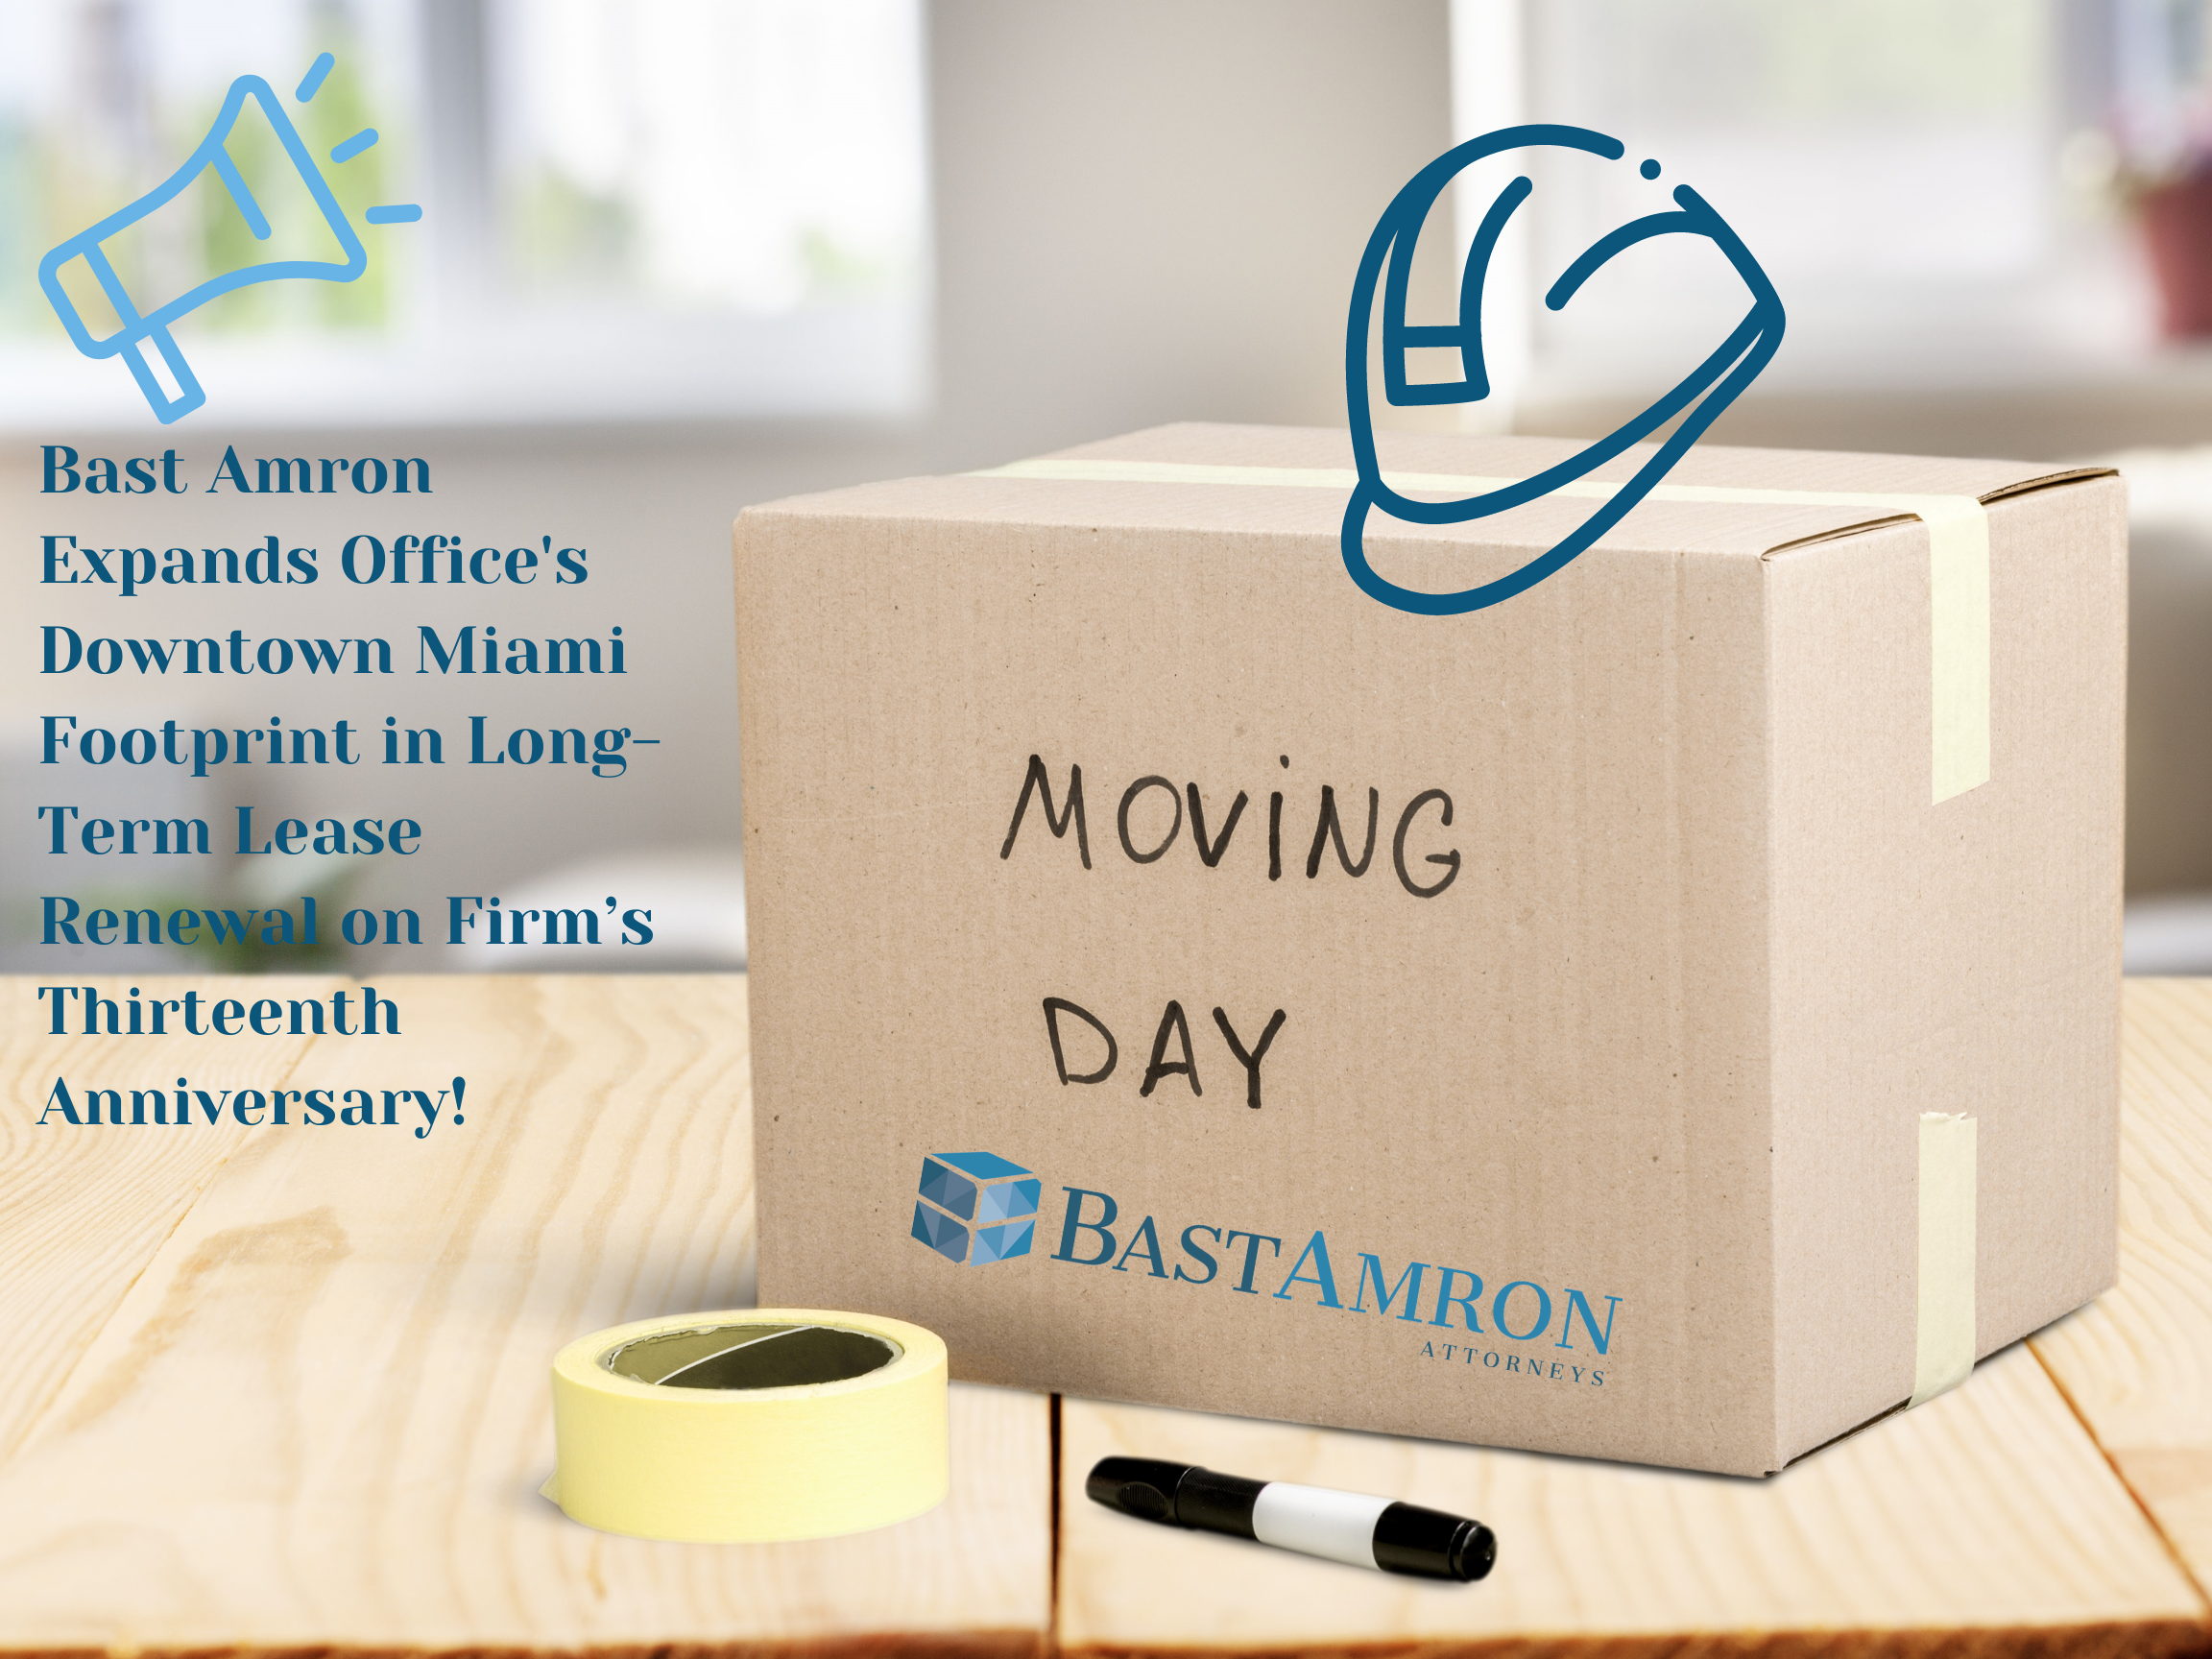 BAST AMRON EXPANDS FOOTPRINT WITH LONG-TERM LEASE RENEWAL ON FIRM’S THIRTEENTH ANNIVERSARY